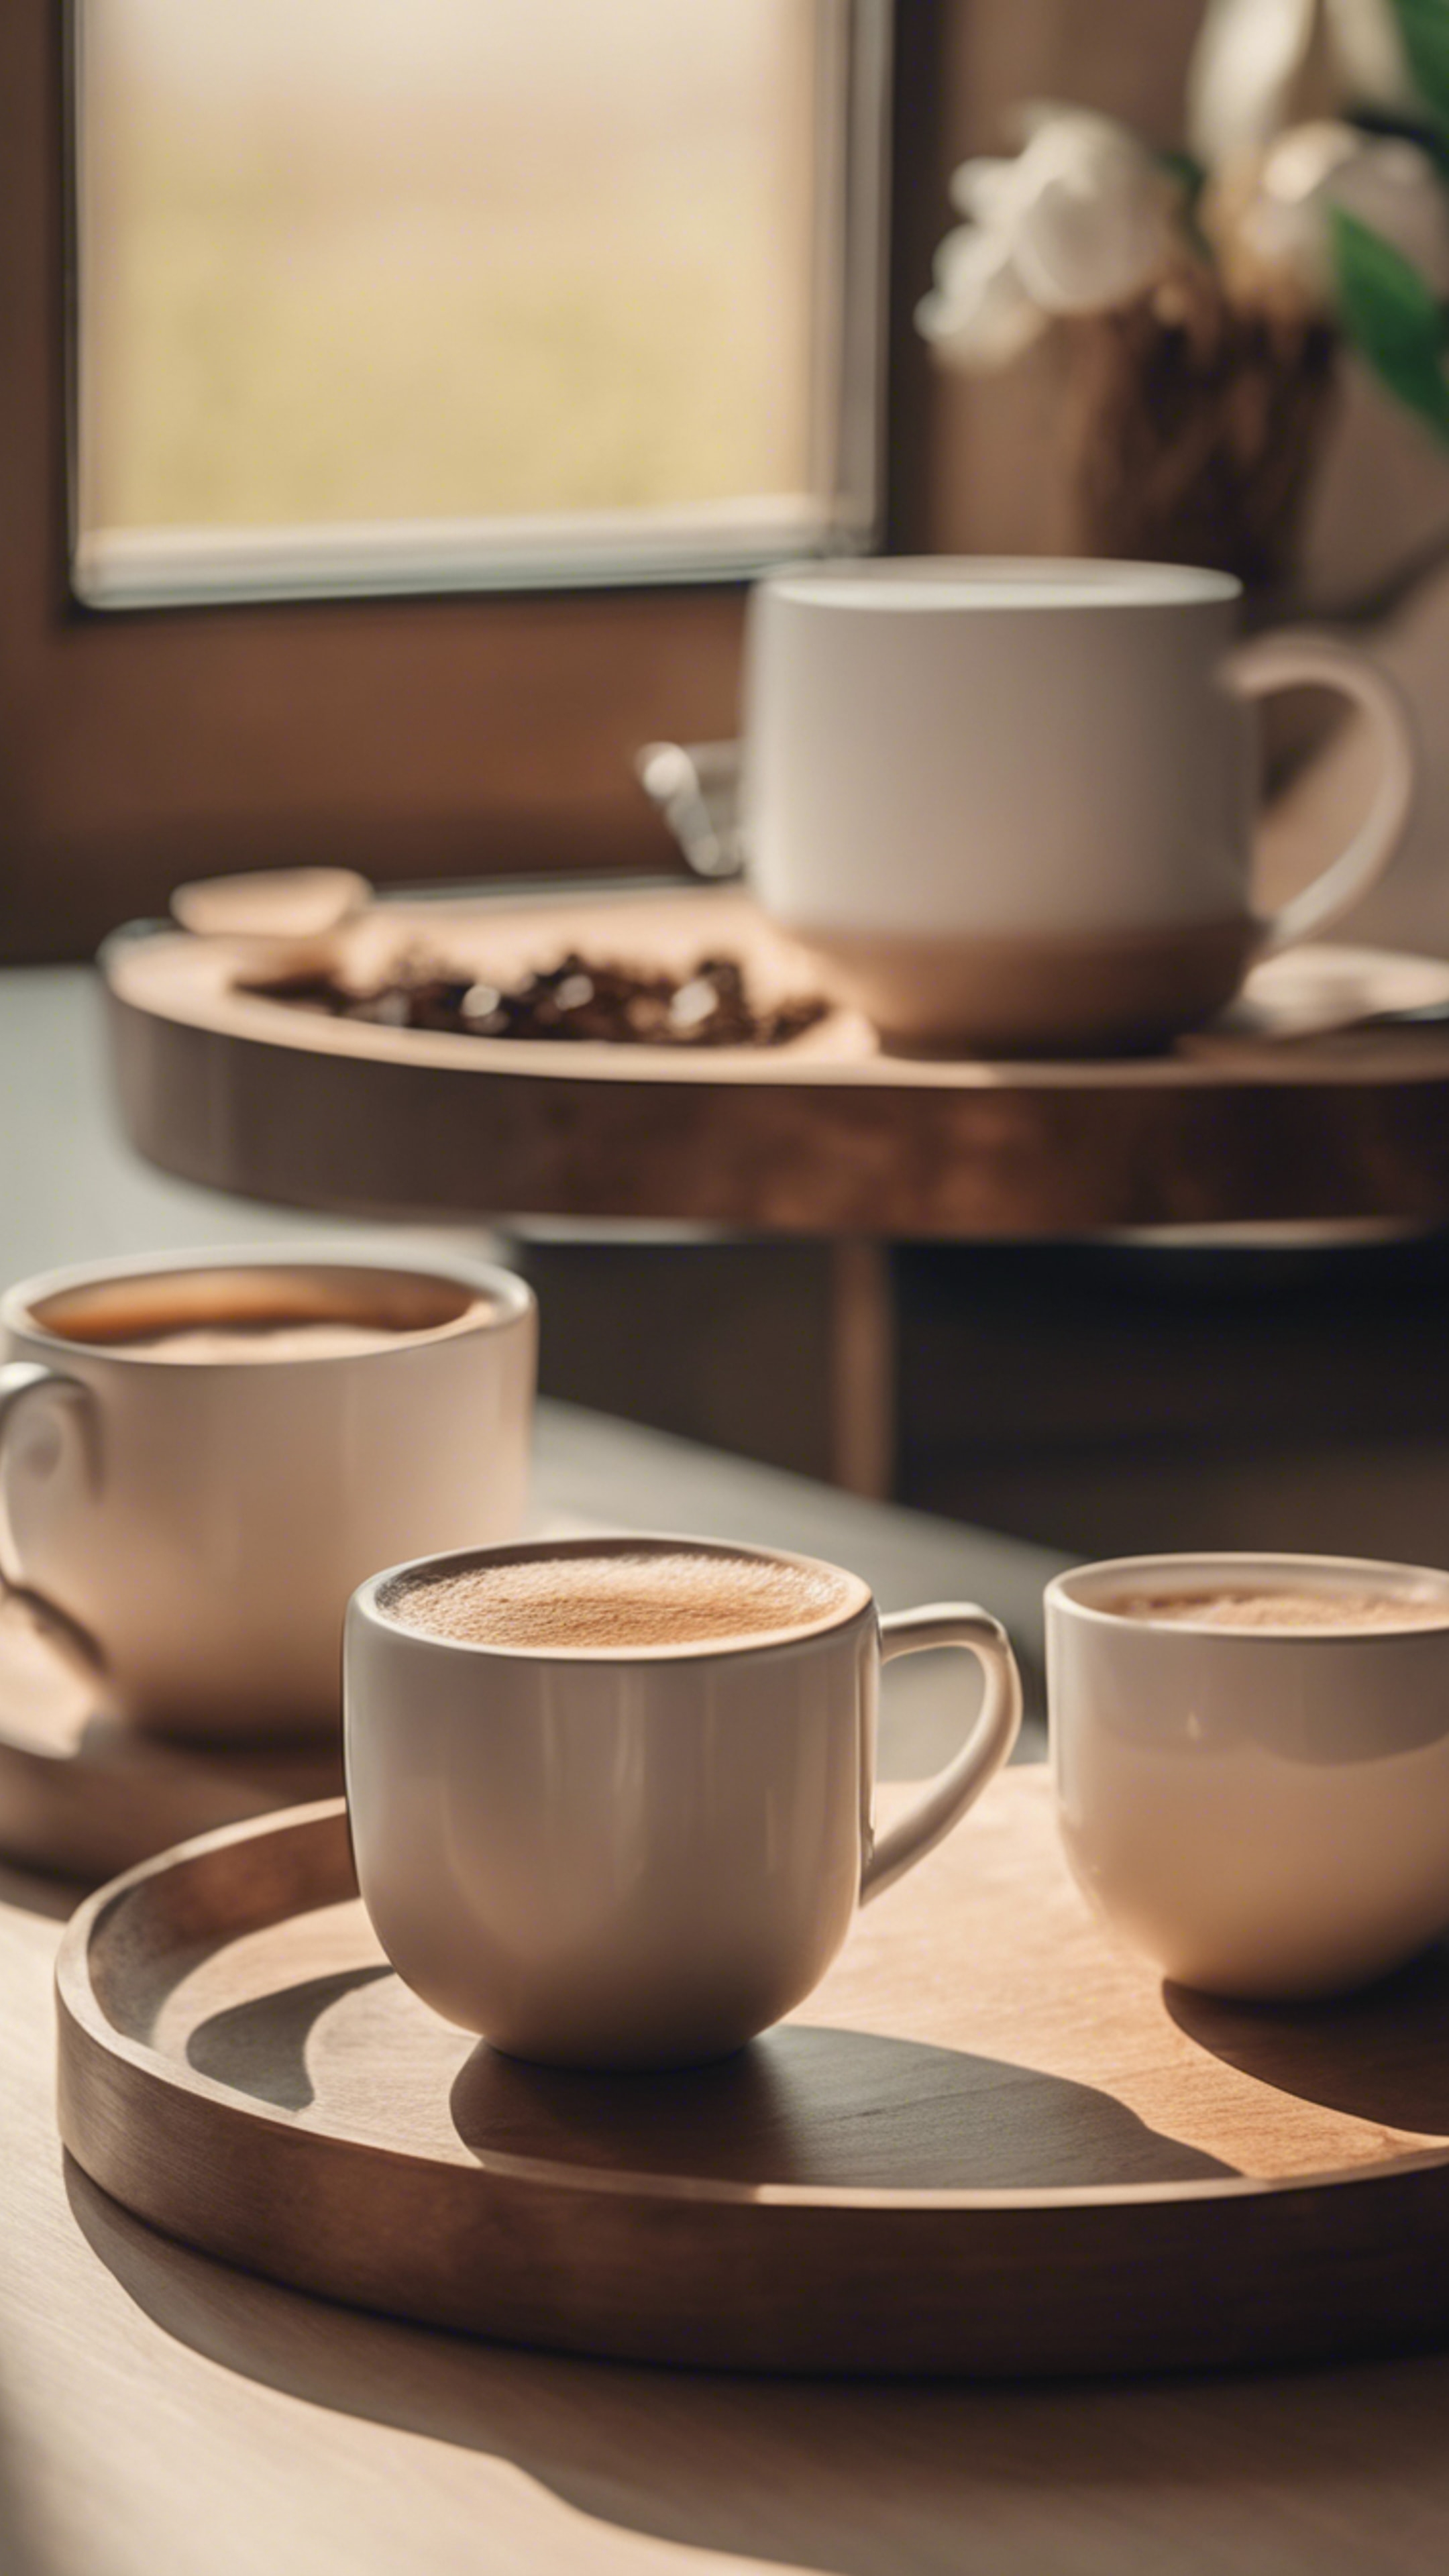 Beige-colored, minimalist coffee mugs arranged on a wooden tray with a steaming cup of coffee. Wallpaper[97c5bfefb7d545508caa]